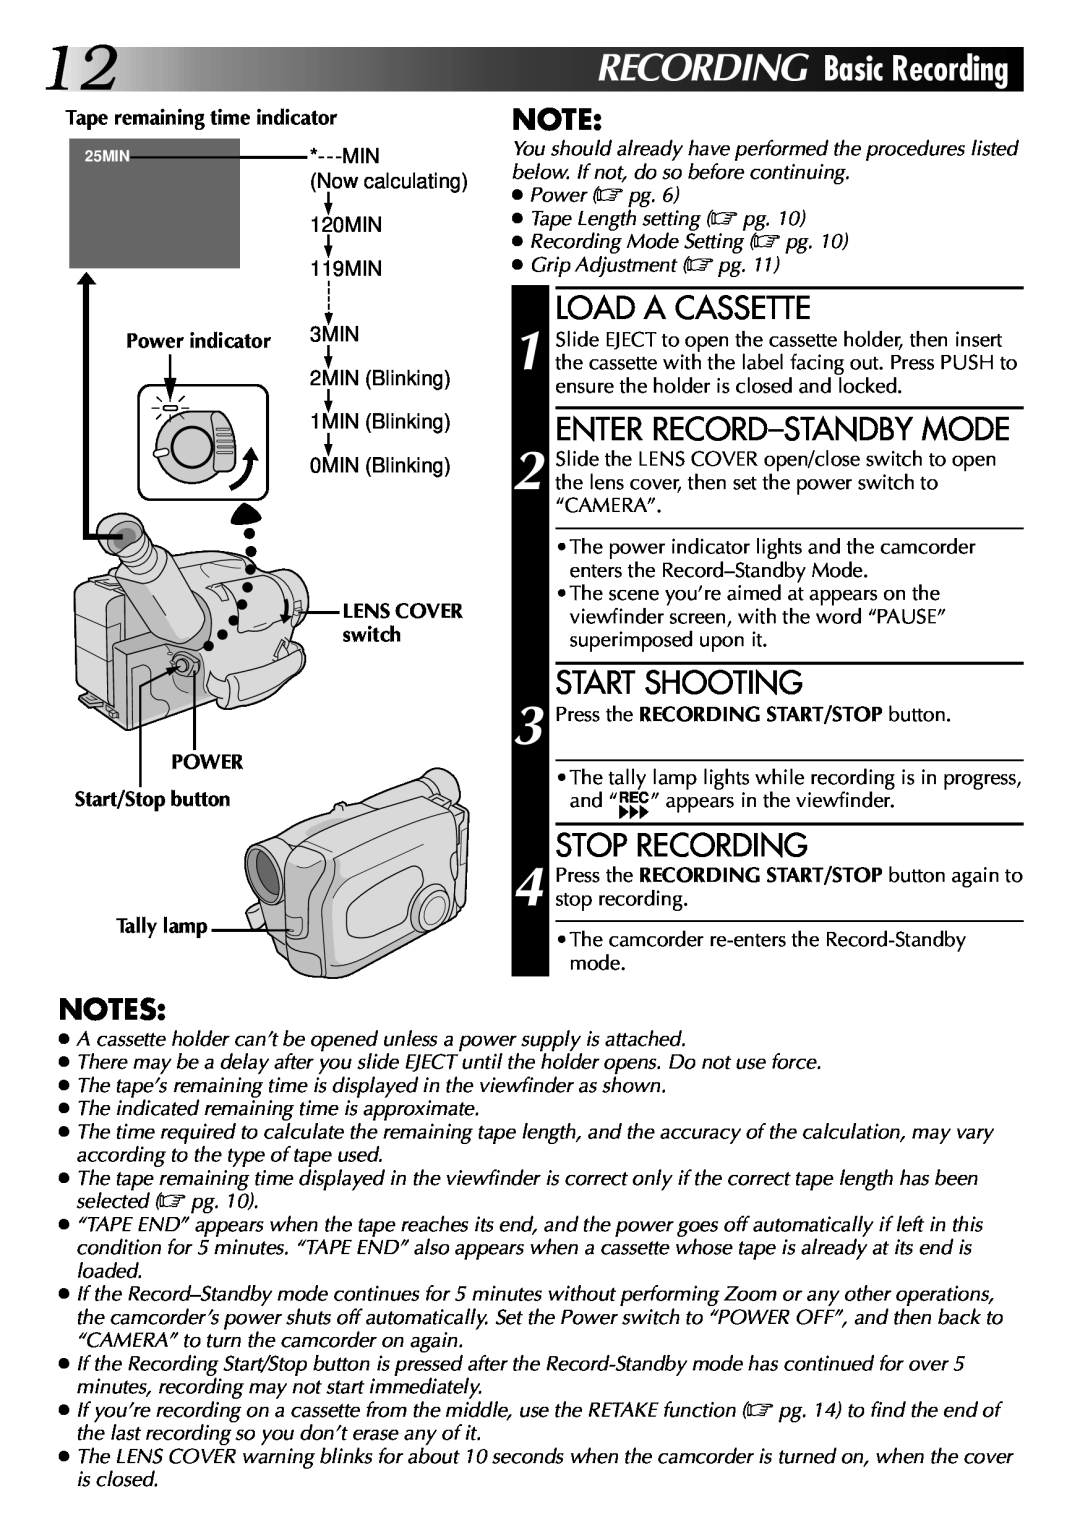 JVC GR-AX570 12RECORDING Basic Recording, Load A Cassette, Enter Record-Standby Mode, Start Shooting, Stop Recording 